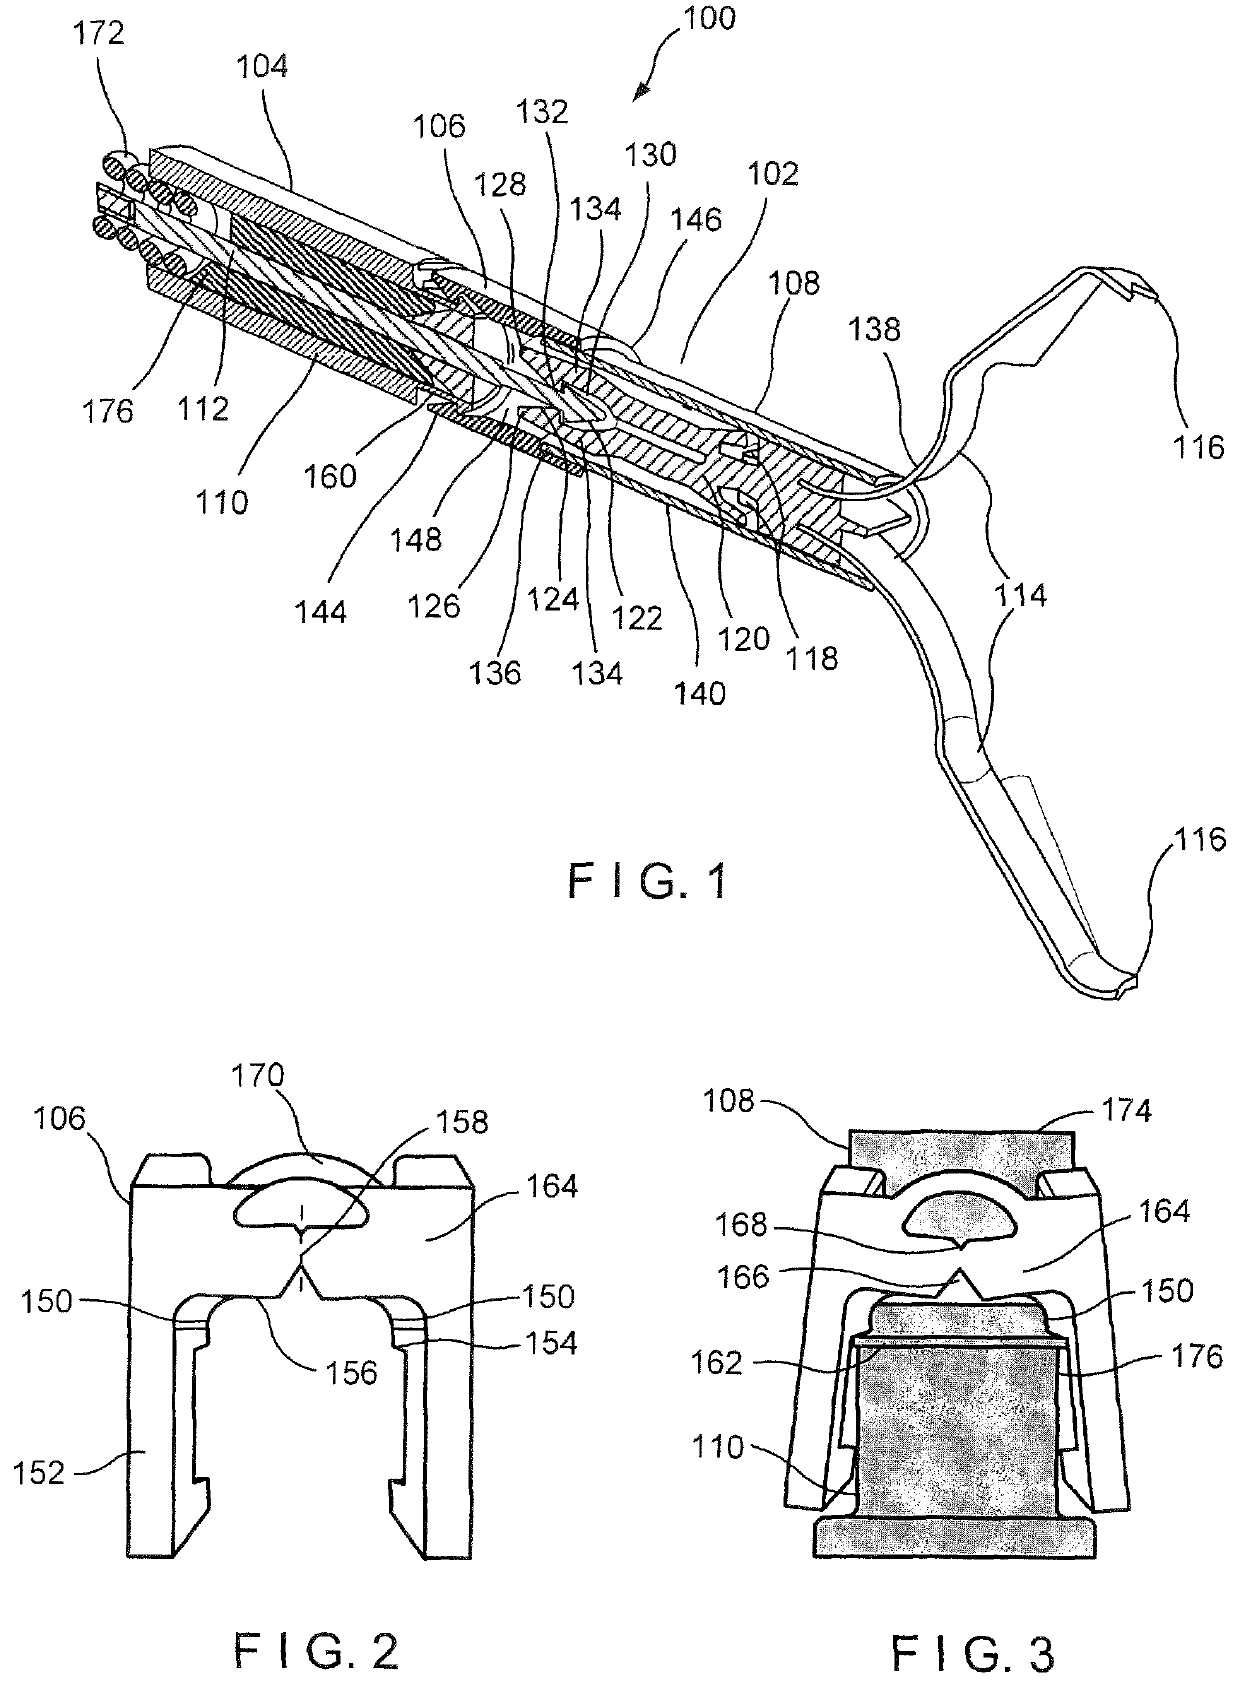 Stretch hoop coupler for reloadable hemostasis clipping device